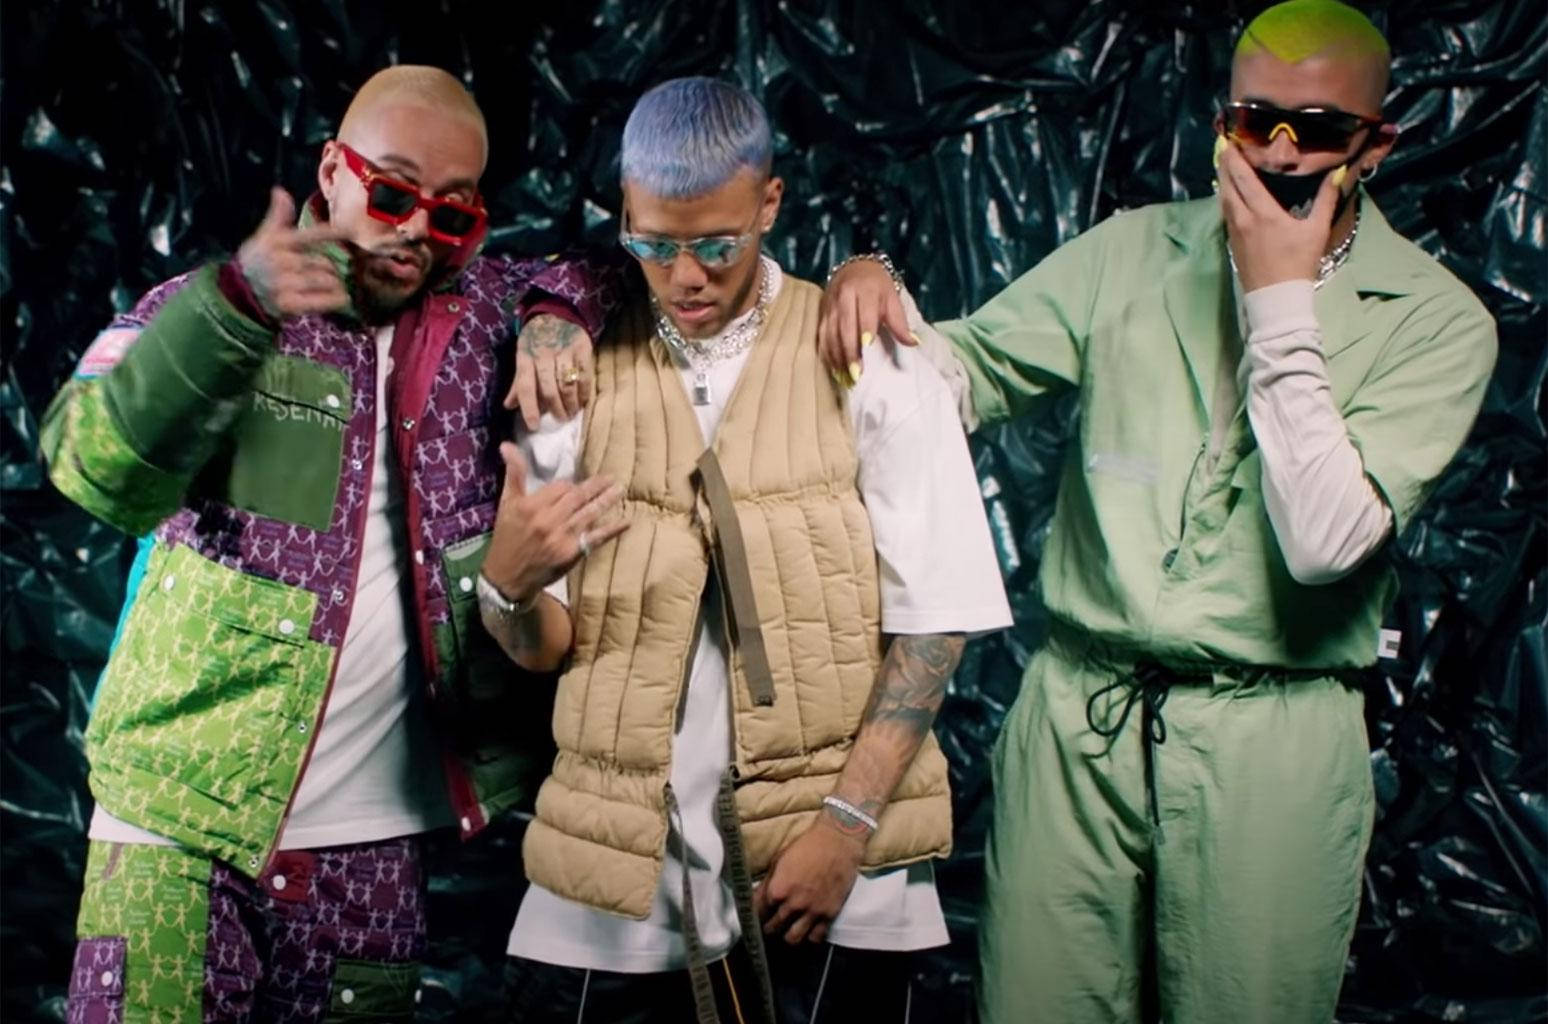 Jhay Cortez, J Balvin, And Bad Bunny Posing Together For A Photoshoot